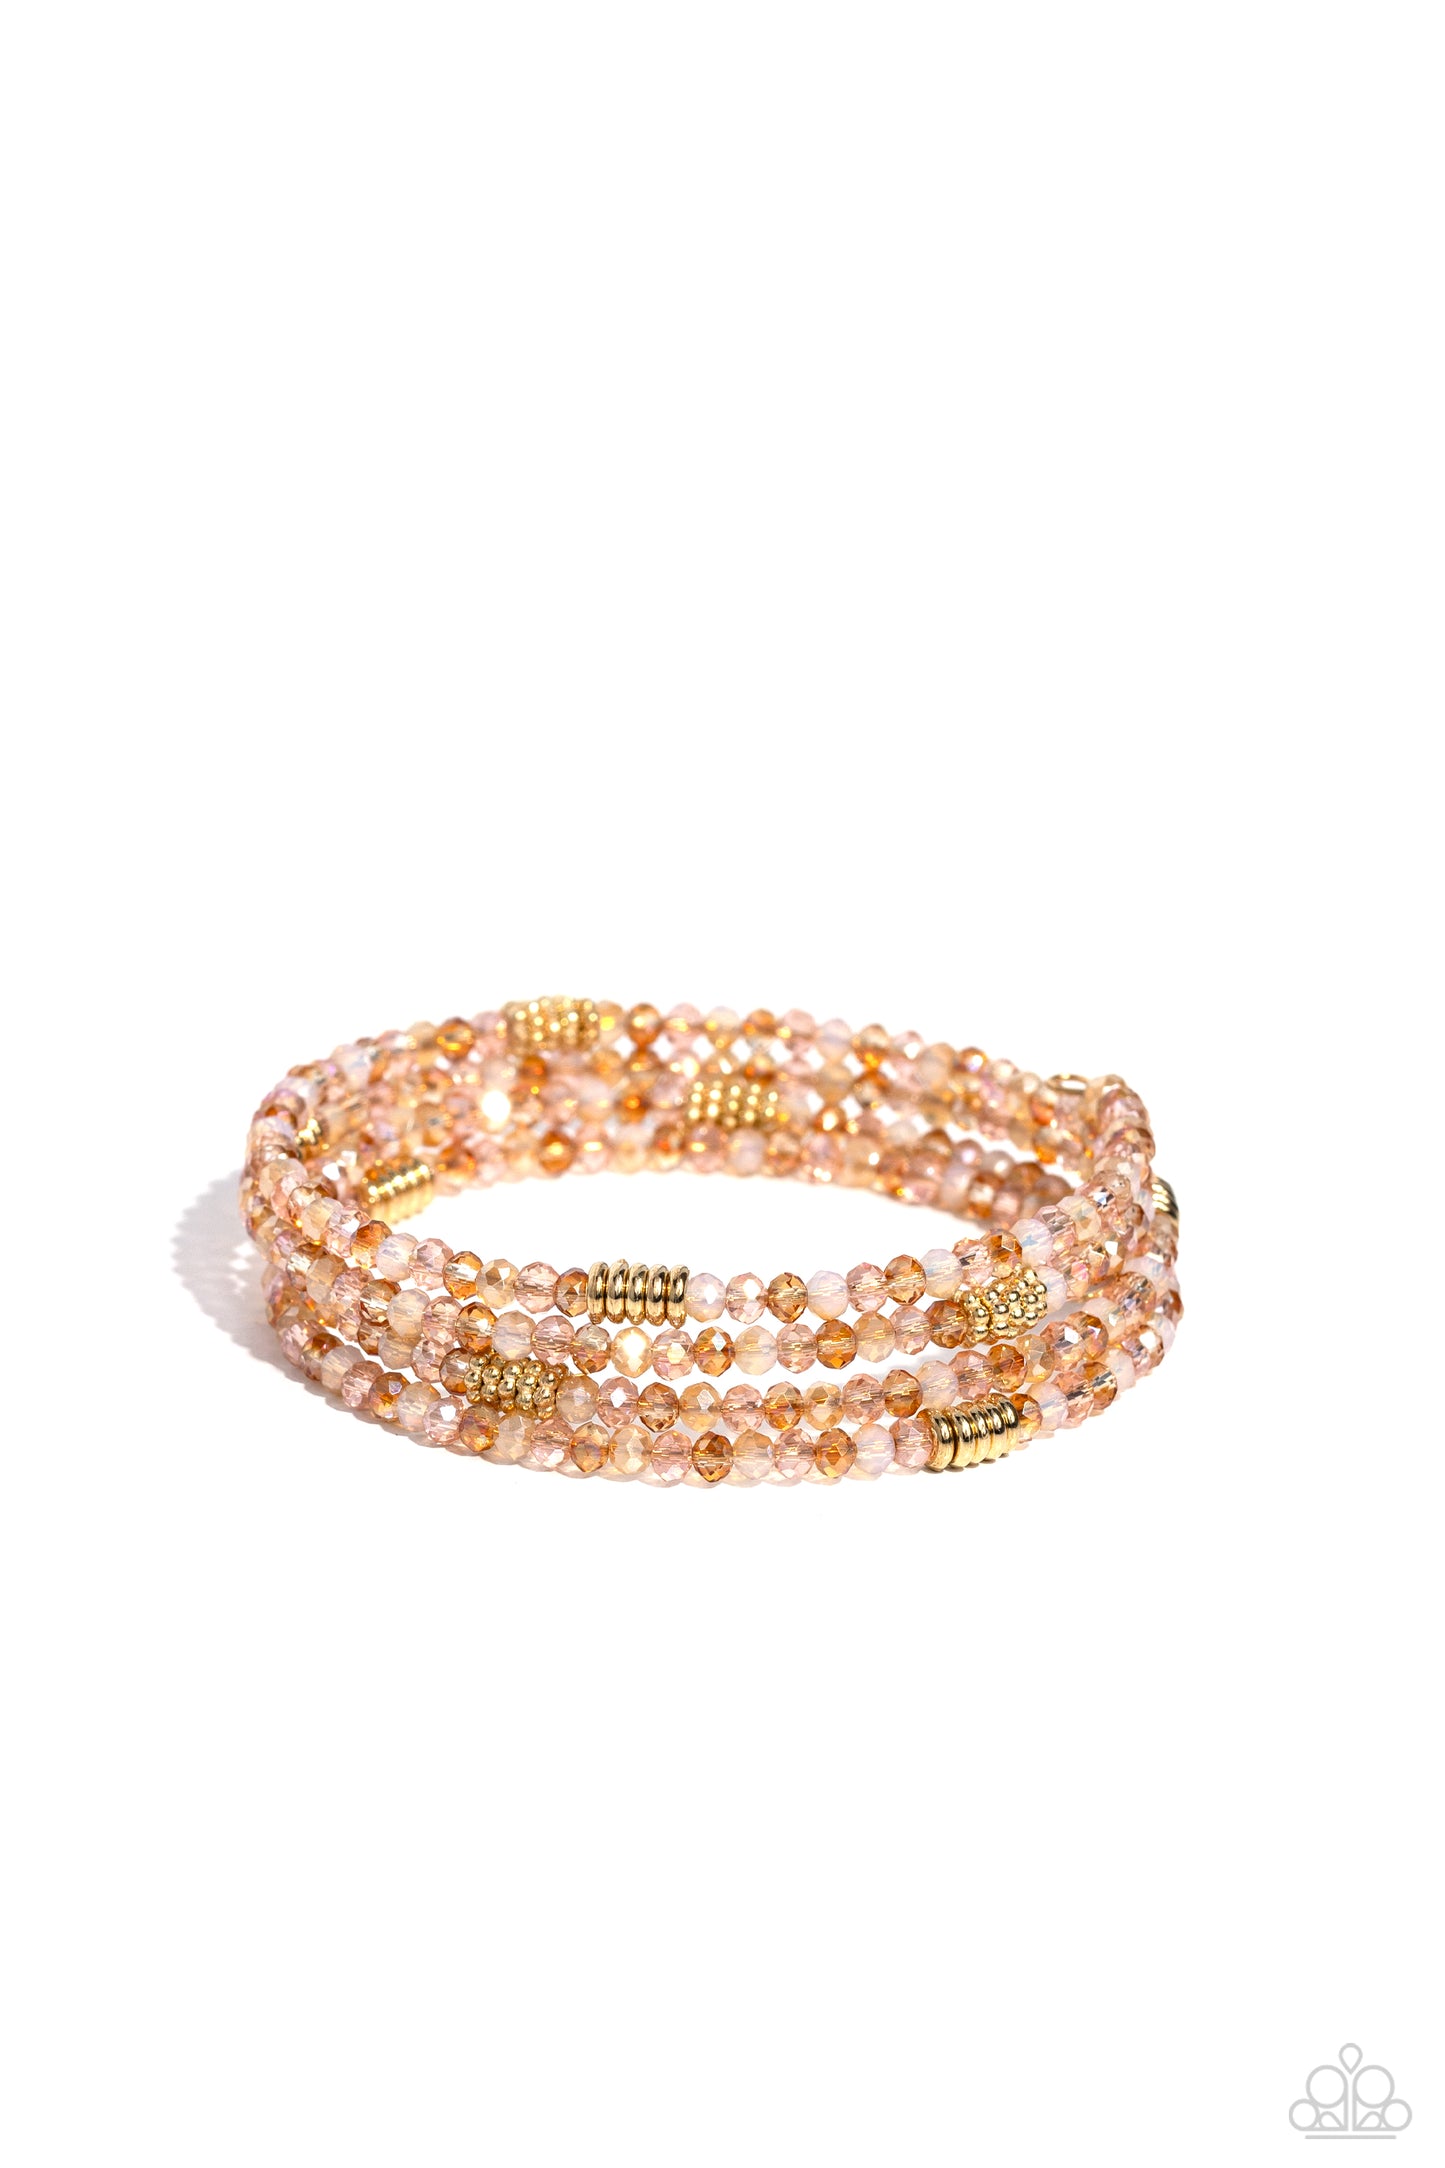 Dreamy Debut Gold Infinity Wrap Coil Bracelet - Paparazzi Accessories  Sections of clear, champagne, and gold beads are threaded along the wrist in an infinity wrap-style bracelet for a dreamy statement.  Sold as one individual bracelet.  P9RE-GDXX-402XX